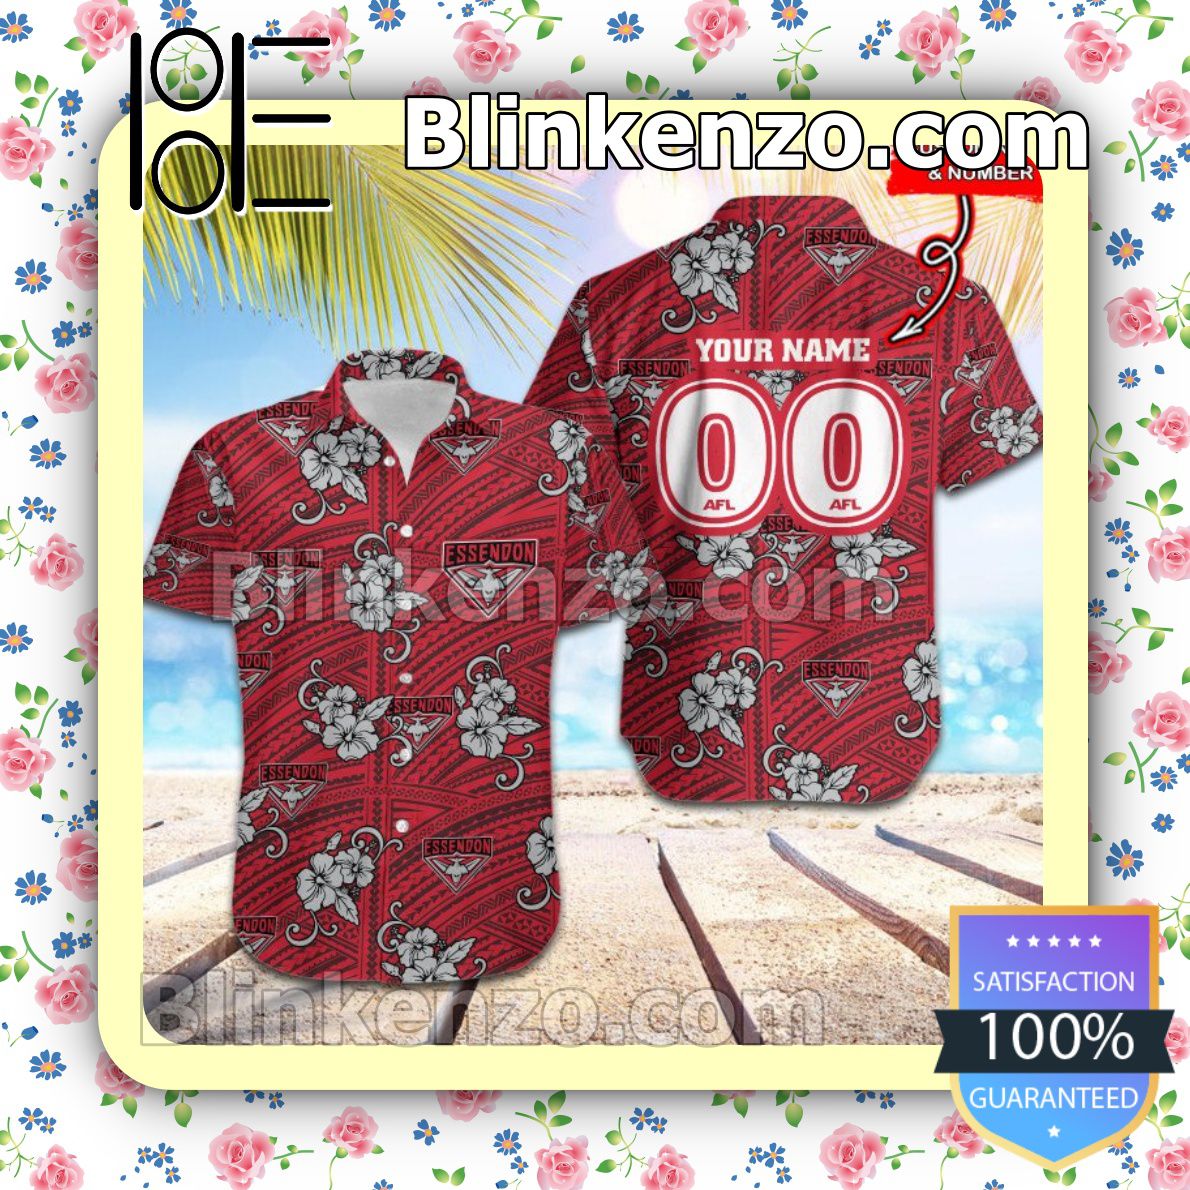 The cheapest AFL Essendon Bombers Personalized Summer Beach Shirt